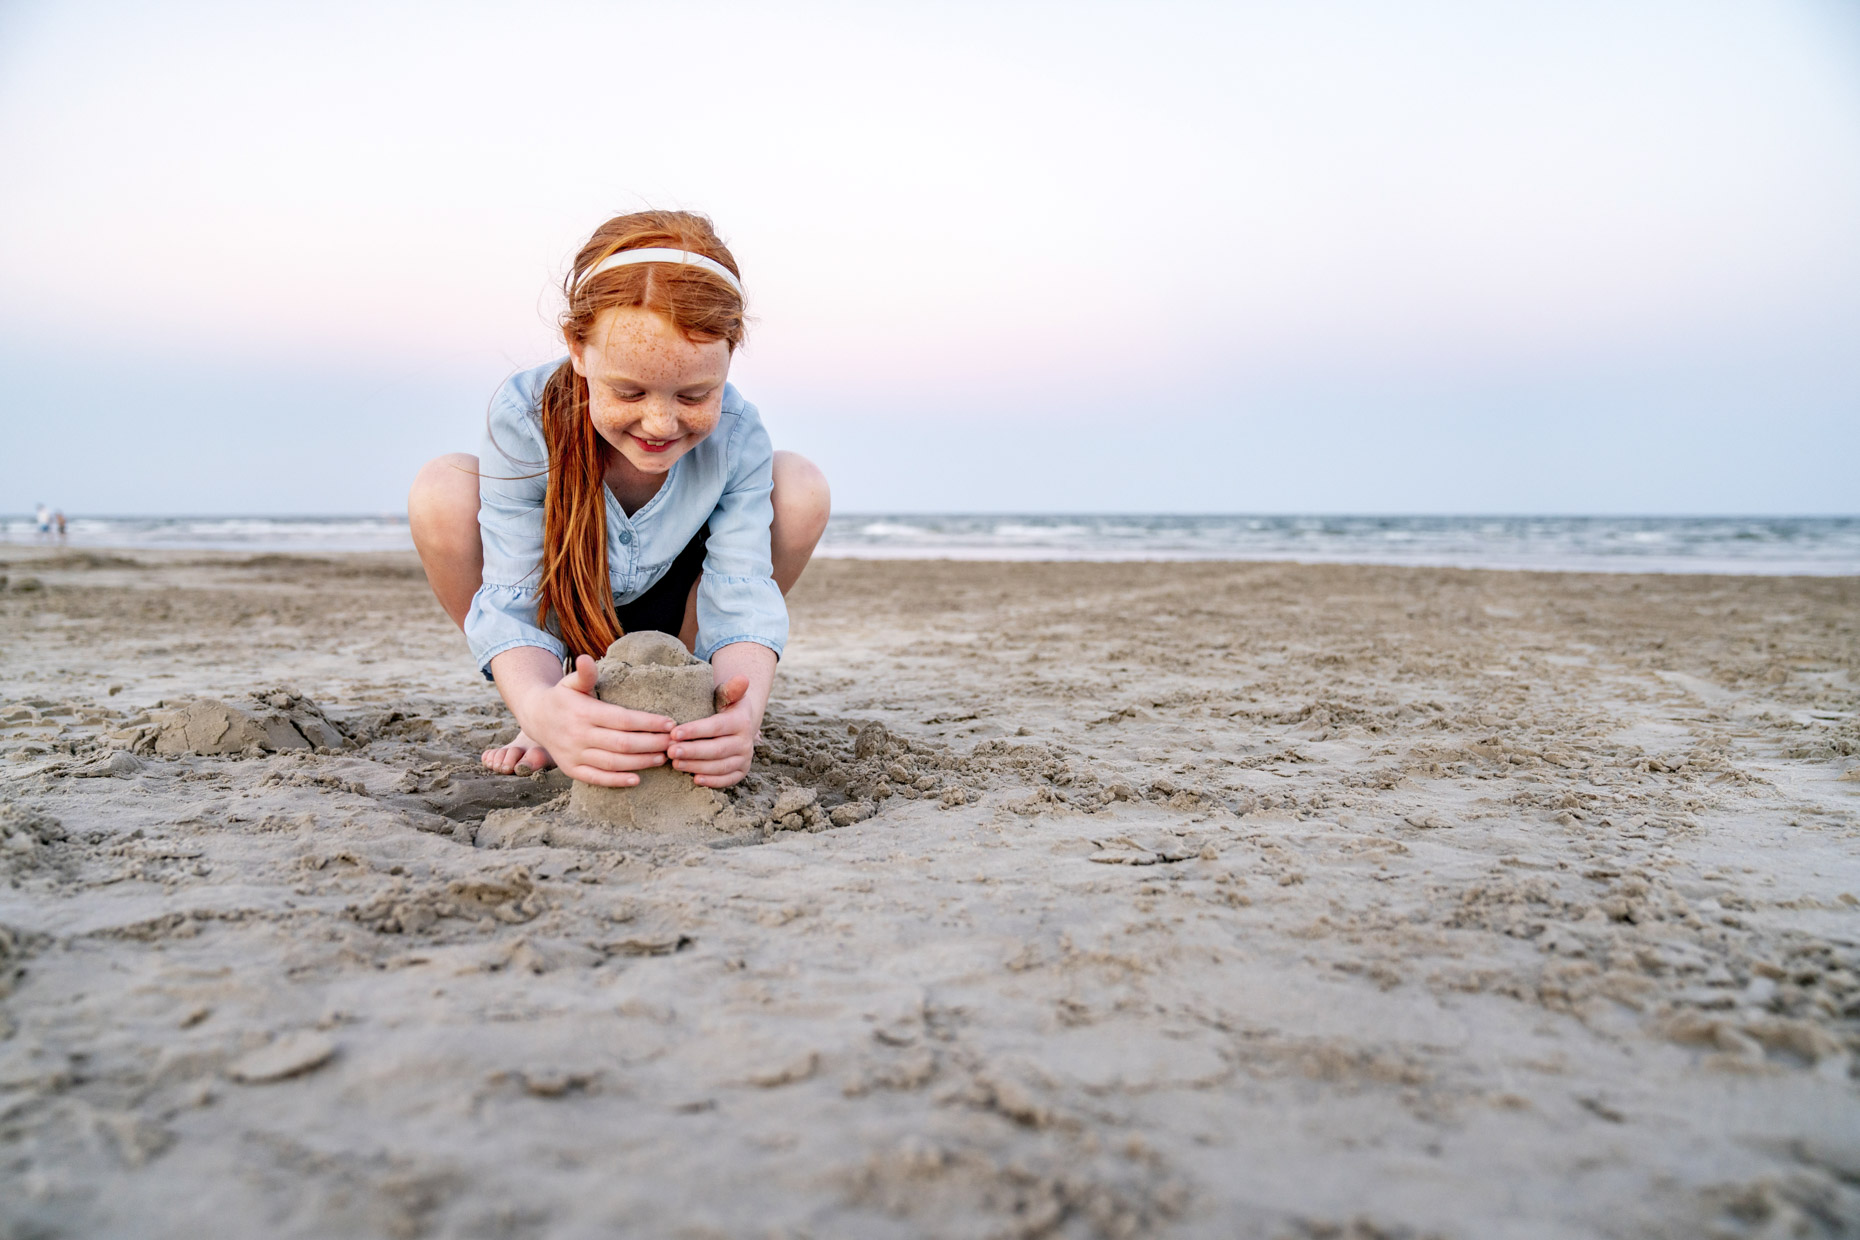 Red haired girl building sand castle